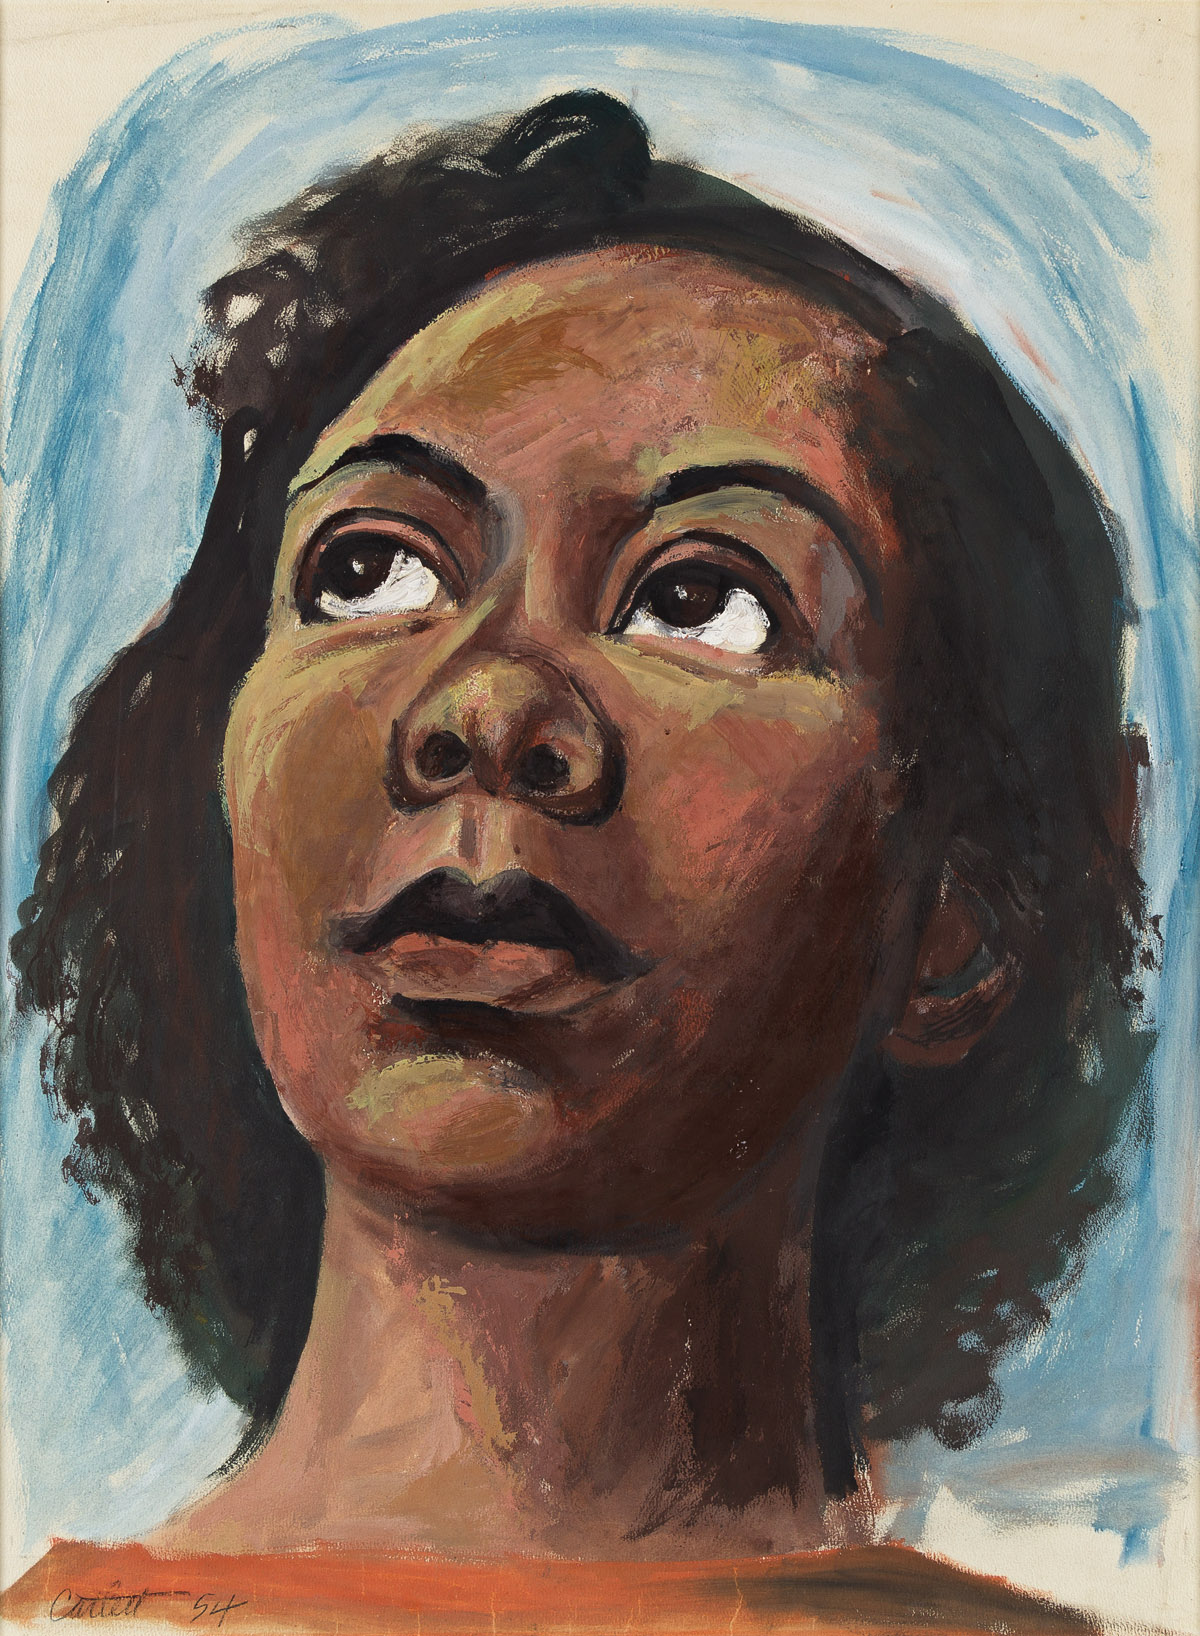 ELIZABETH CATLETT (1915 - 2012) Untitled (Young Woman Looking Up).